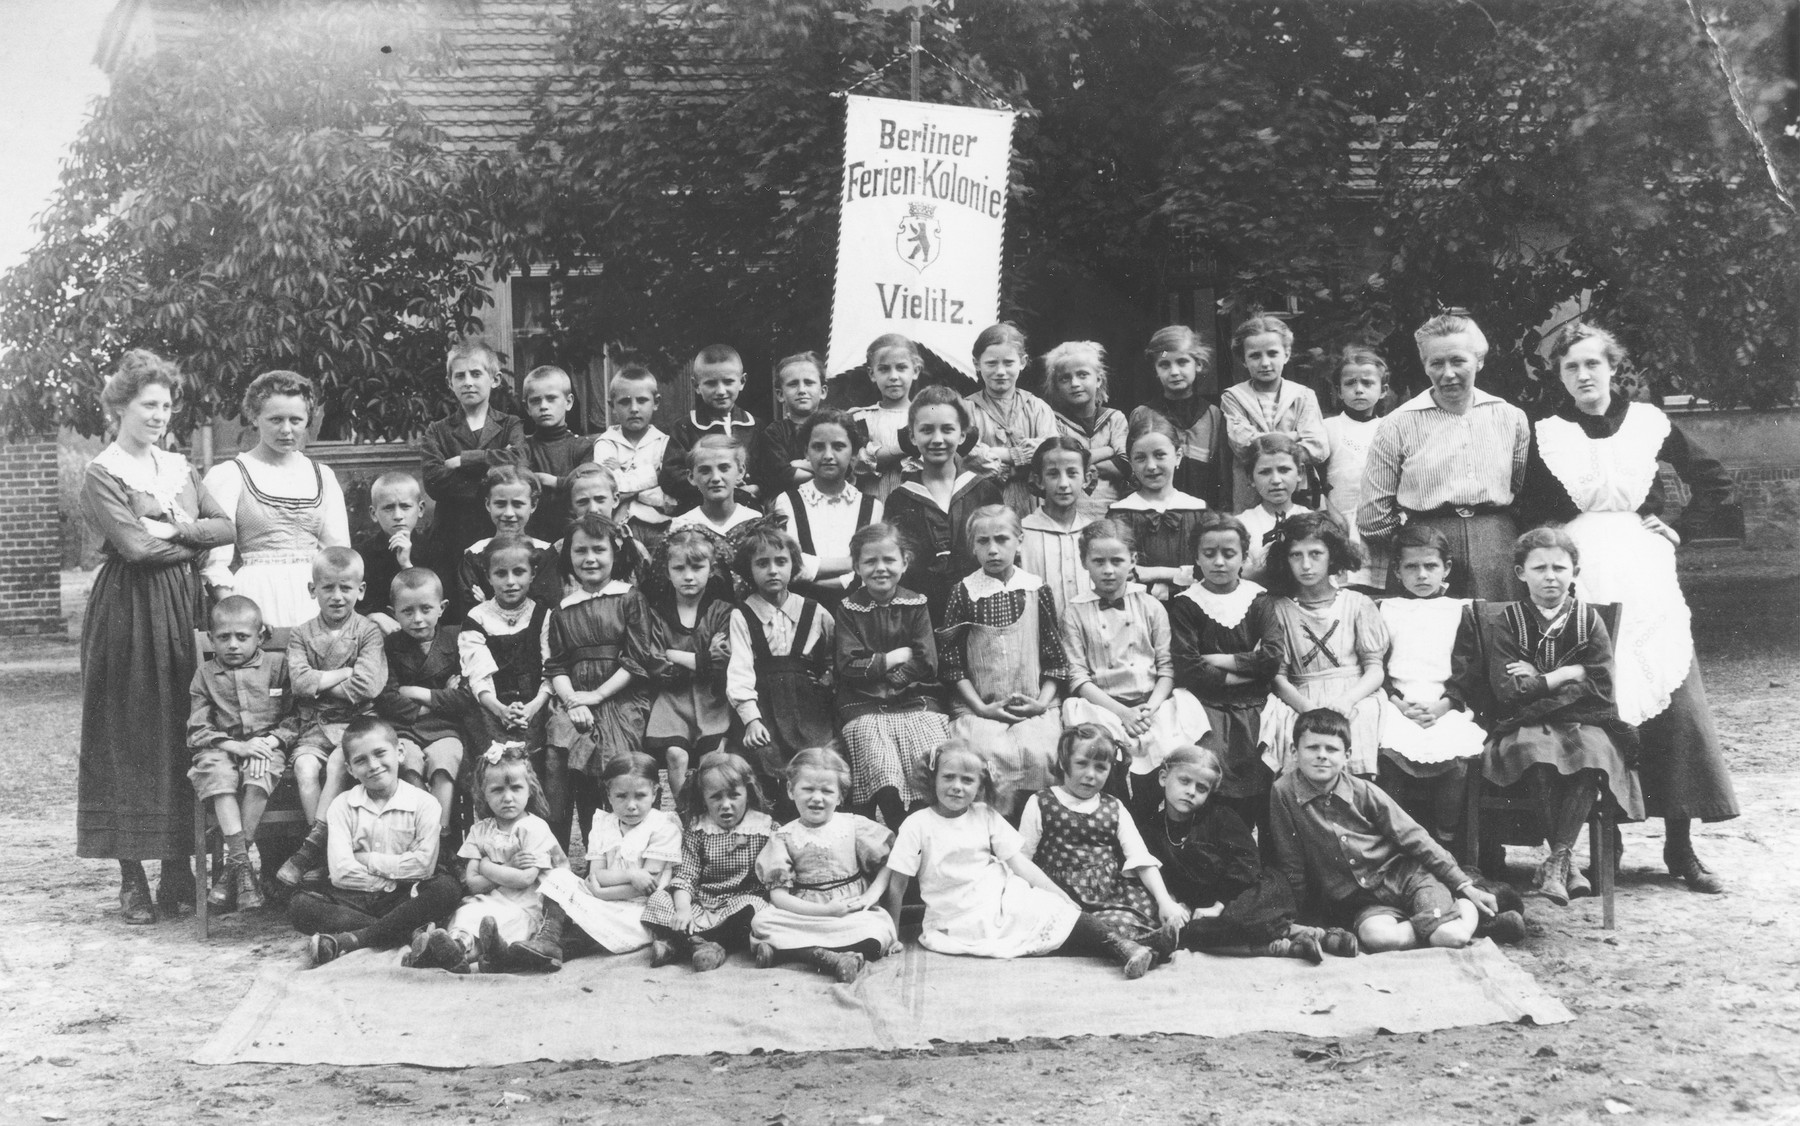 Students and teachers in a Berlin vacation colony.

Among those pictured are George Speigelglas and Maria (Mtizi) Benedick (second row, third from right).